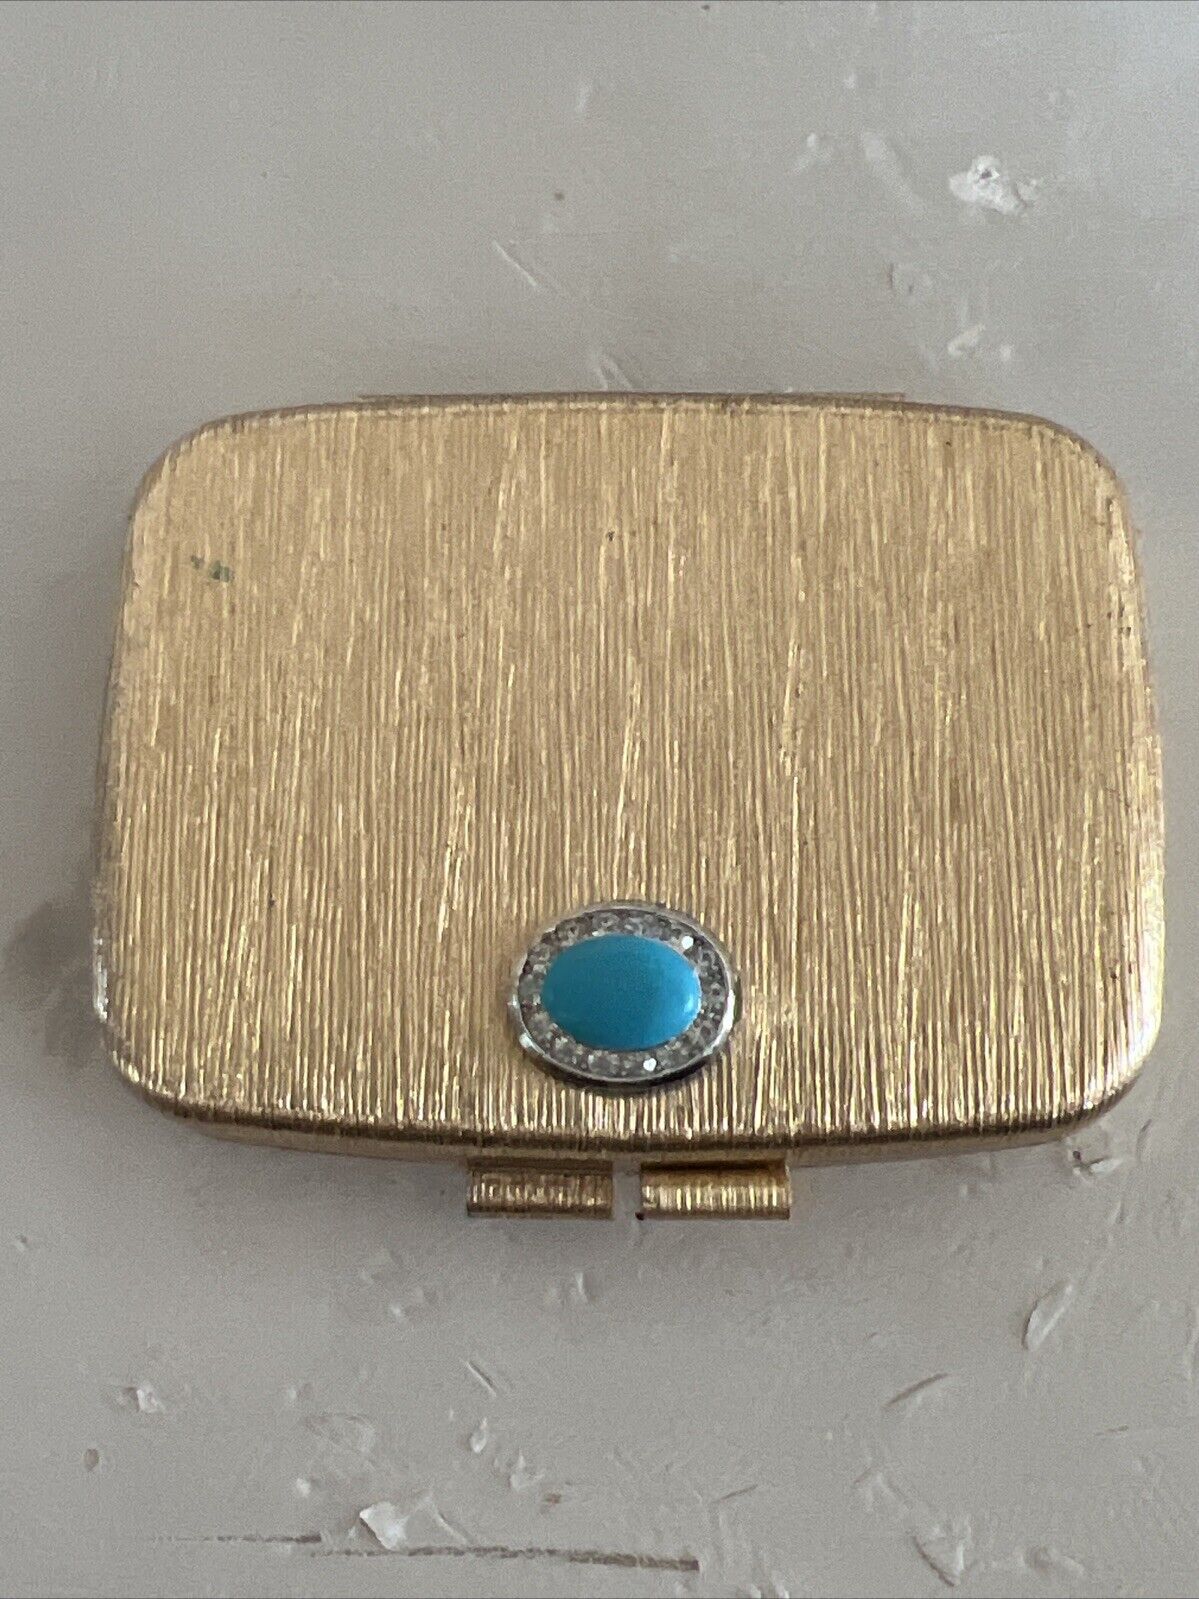 Vintage Revlon Gold and Turquoise Stone Compact Love Pat Pressed Powder Make Up